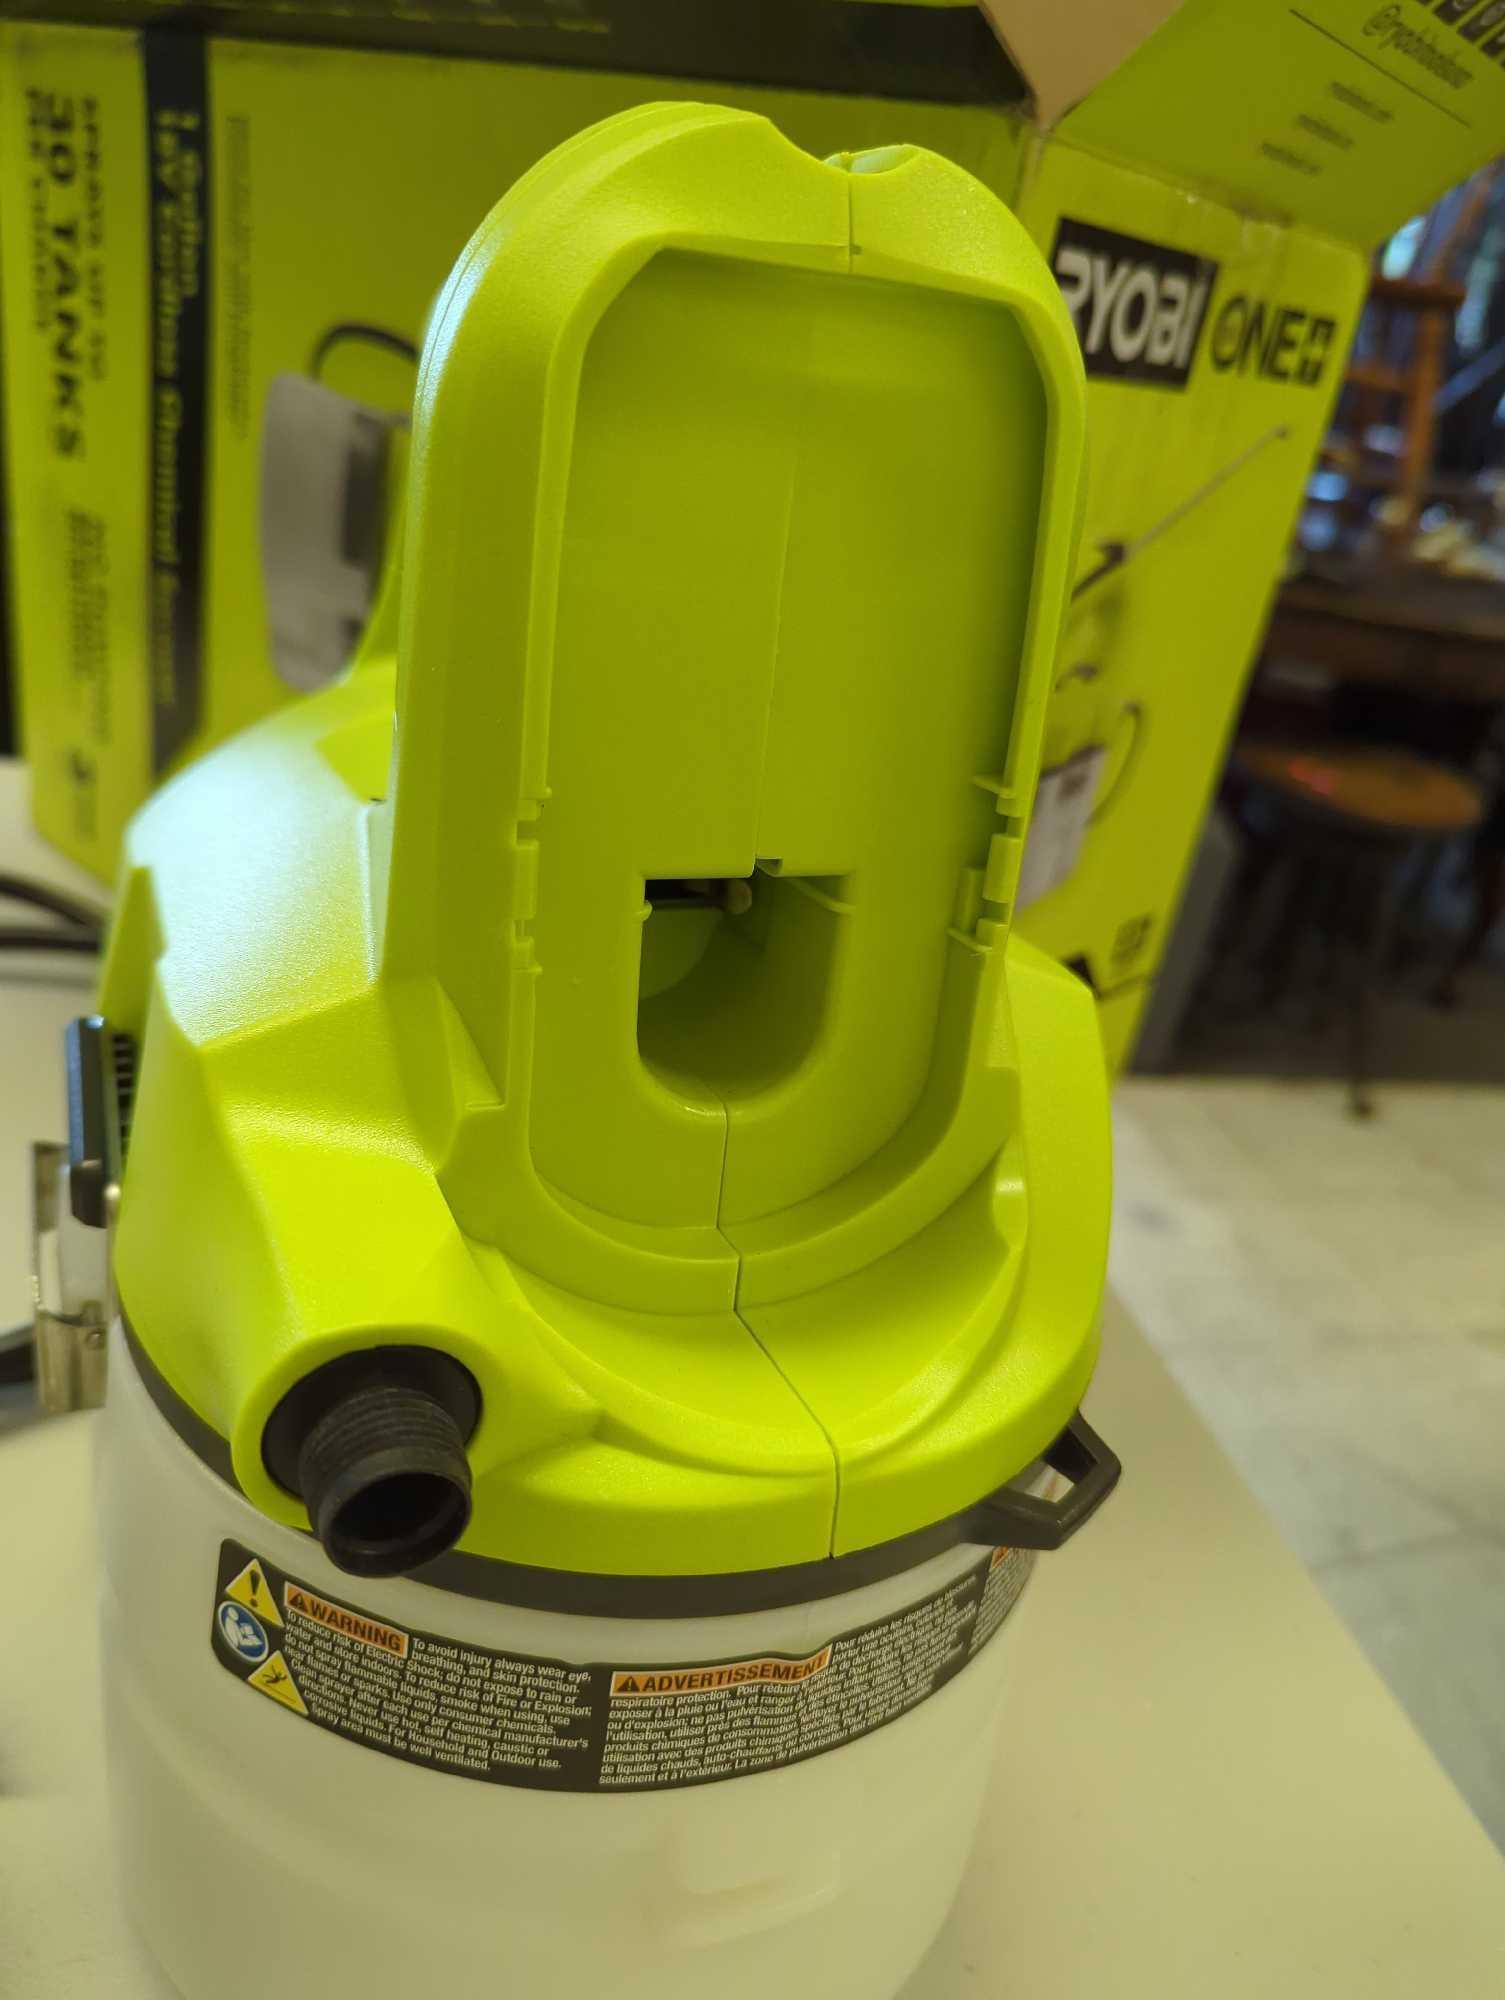 RYOBI ONE+ 18V Cordless Battery 1 Gal. Chemical Sprayer (Tool Only). Comes as is shown in photos.